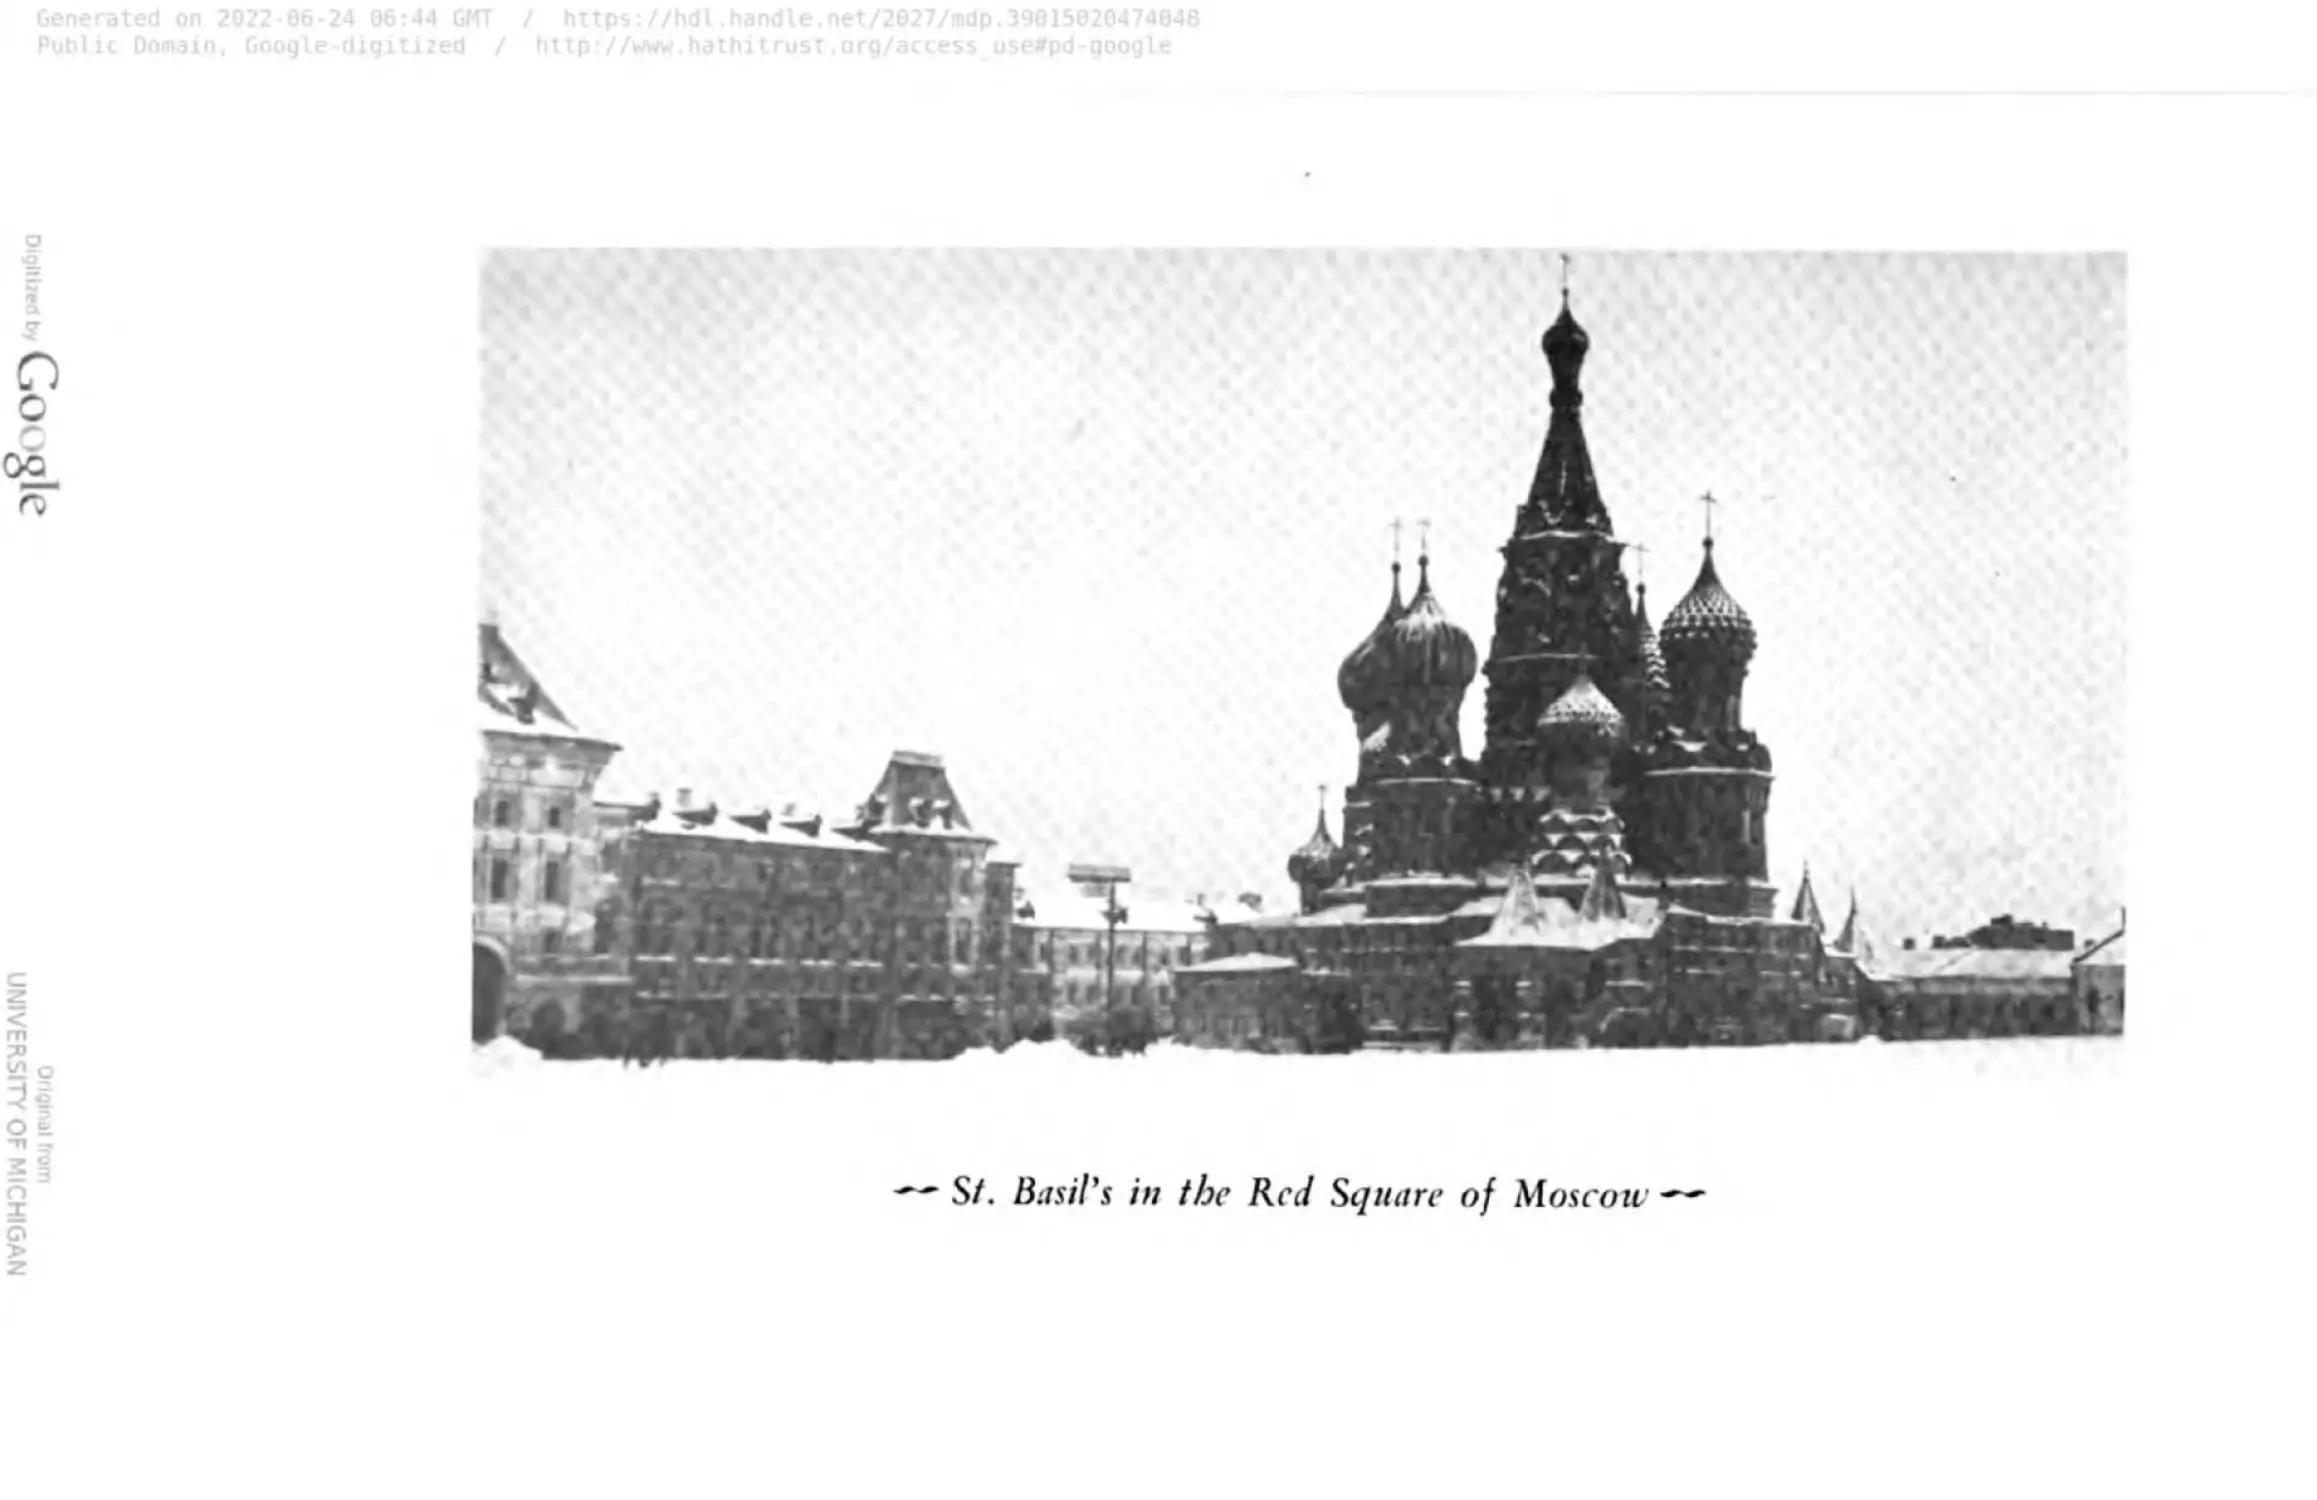 St. Basil’s in the Red Square of Moscow